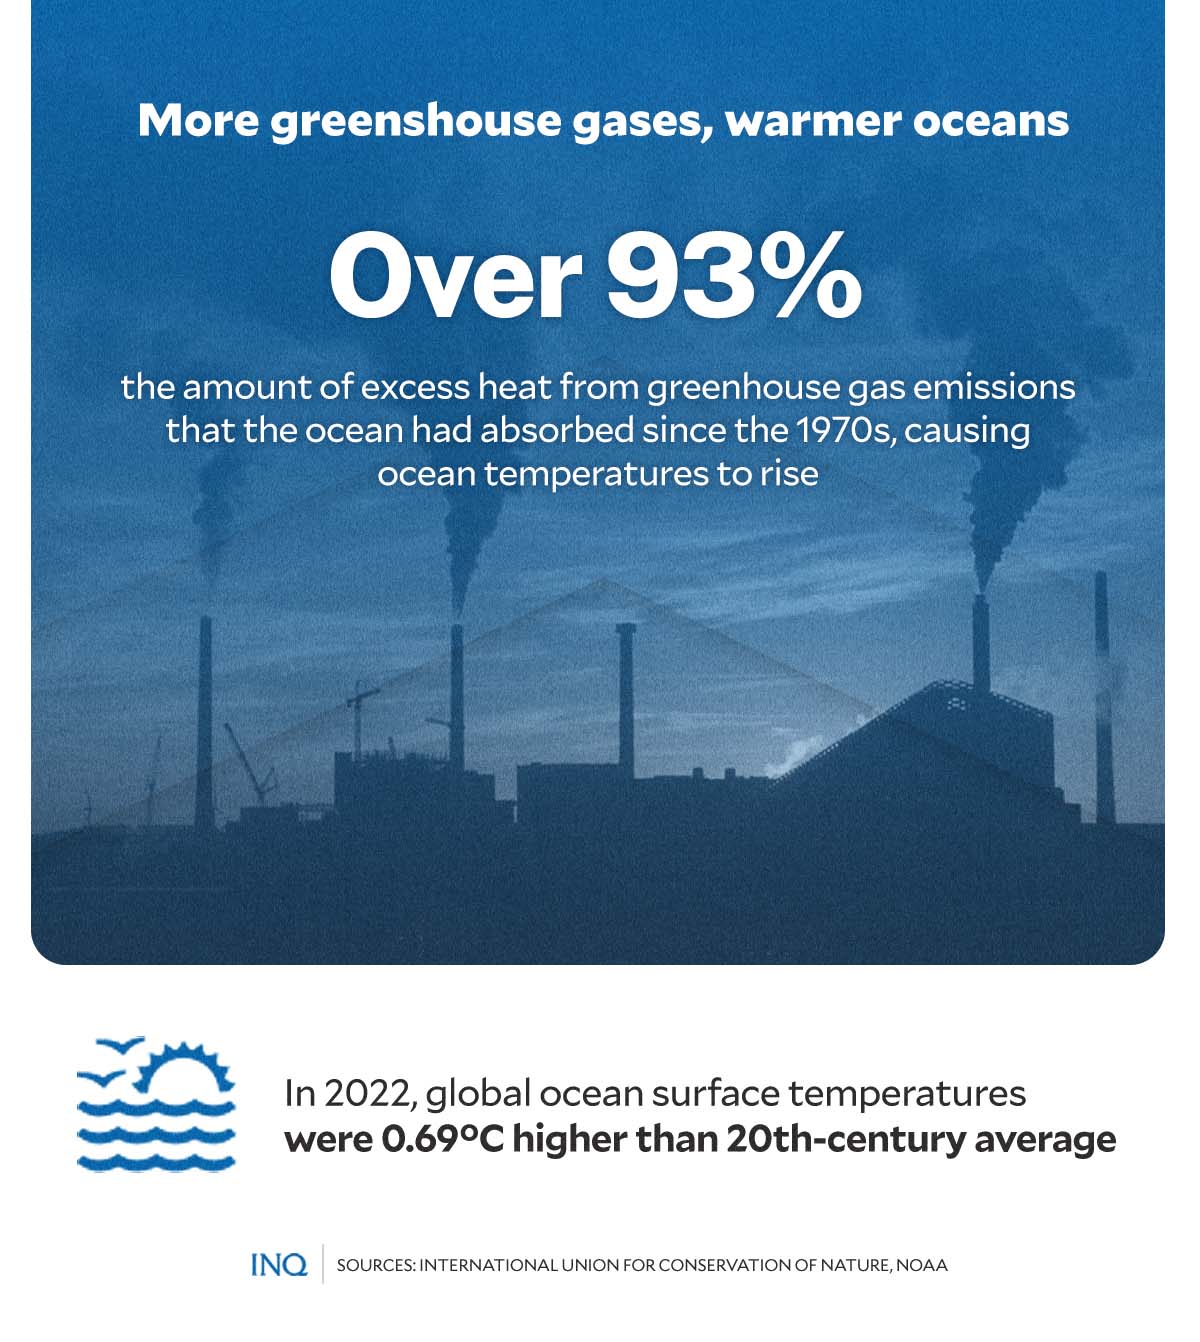 More greenhouse gases, warmer oceans